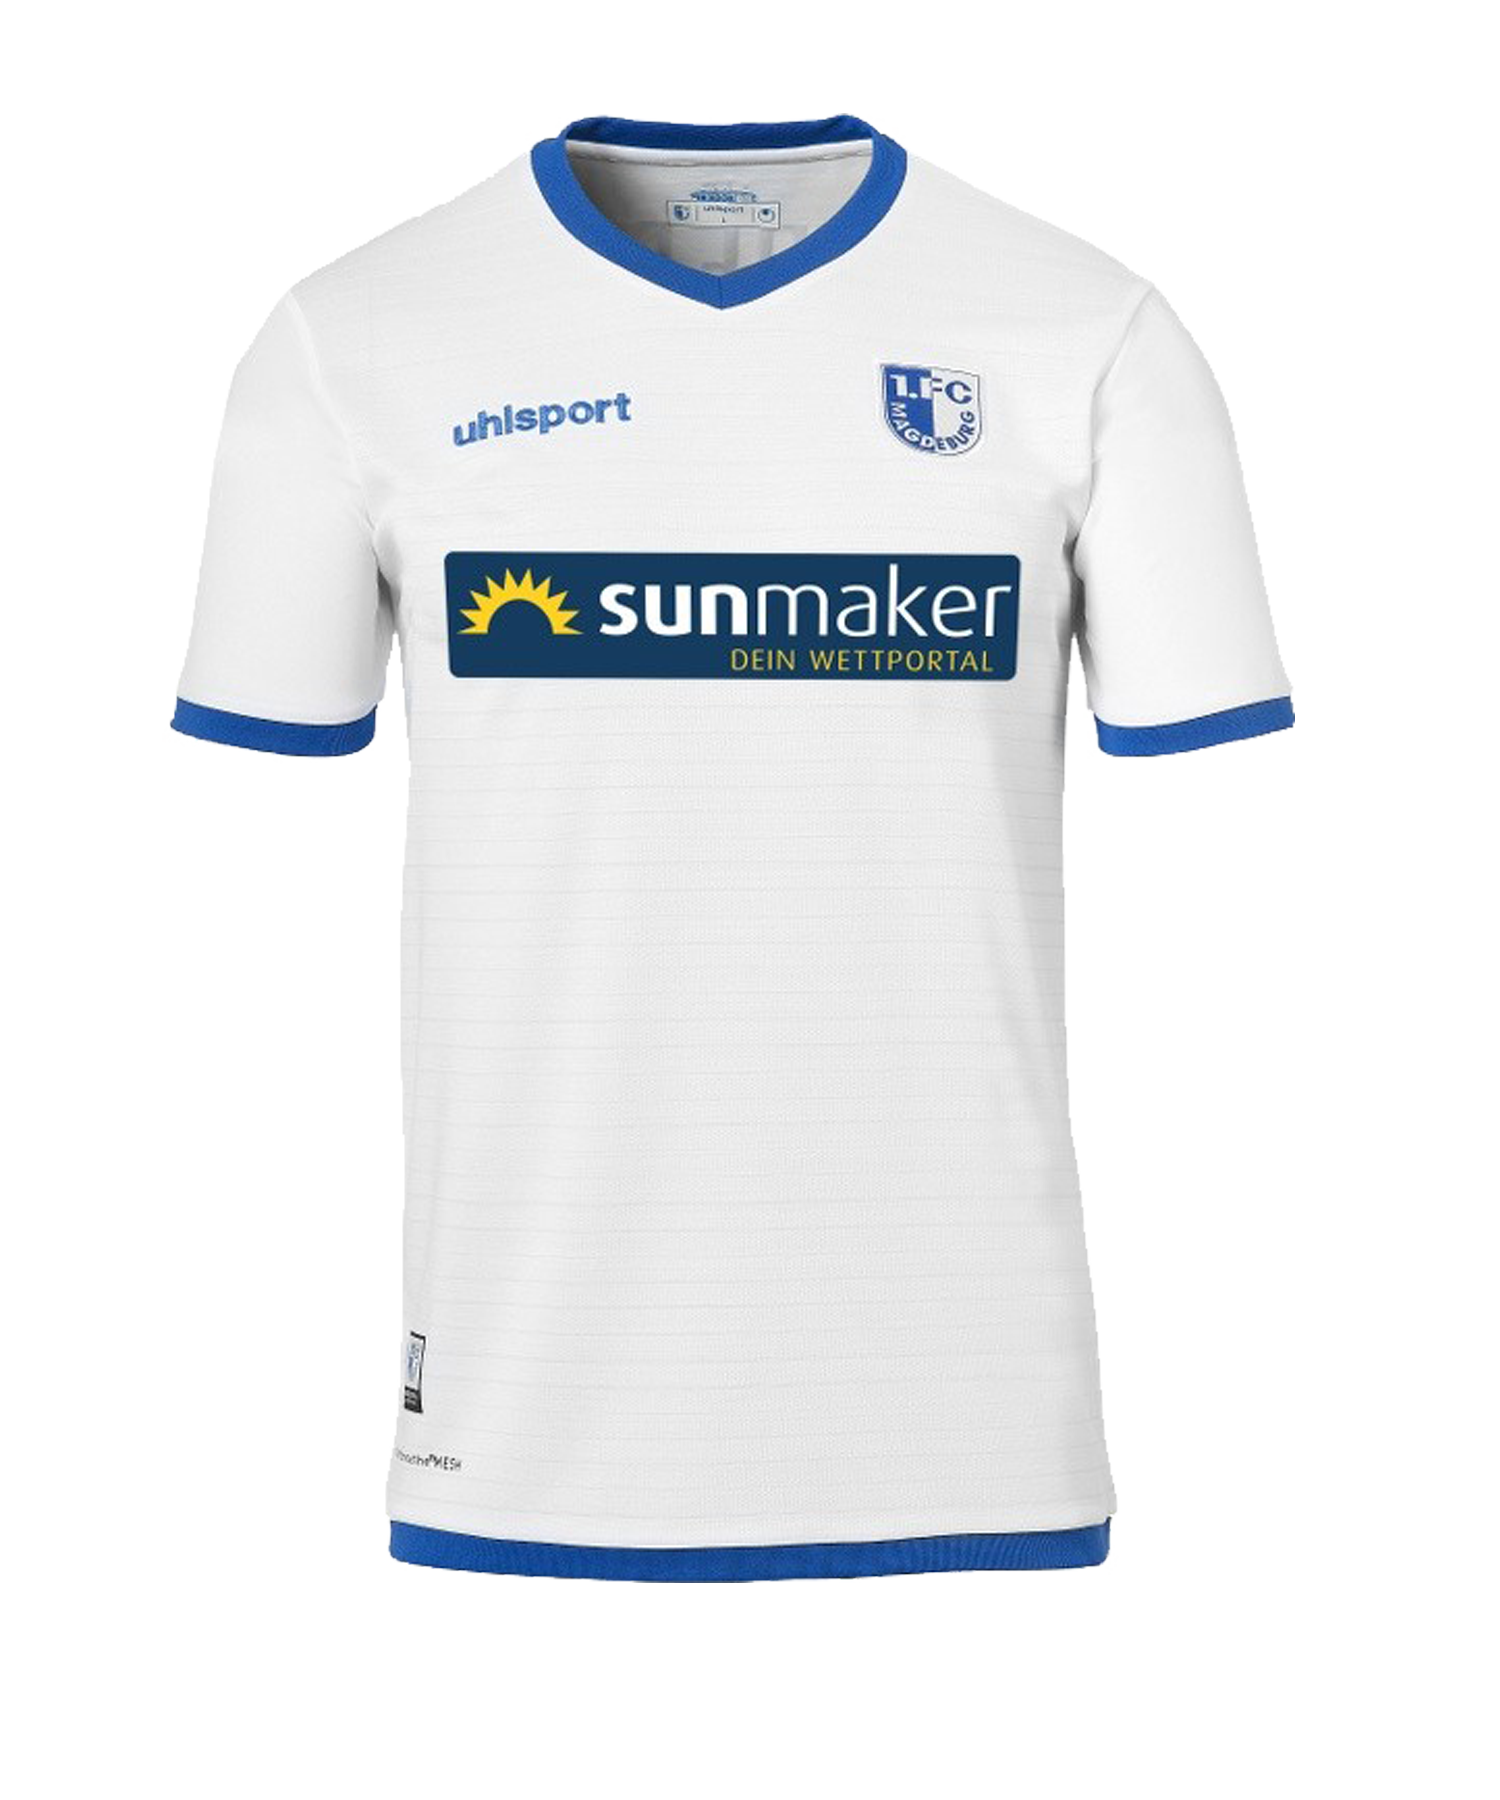 1 Maillot FC Magdebourg 2019/20 Home Uhlsport taille homme XXXL 